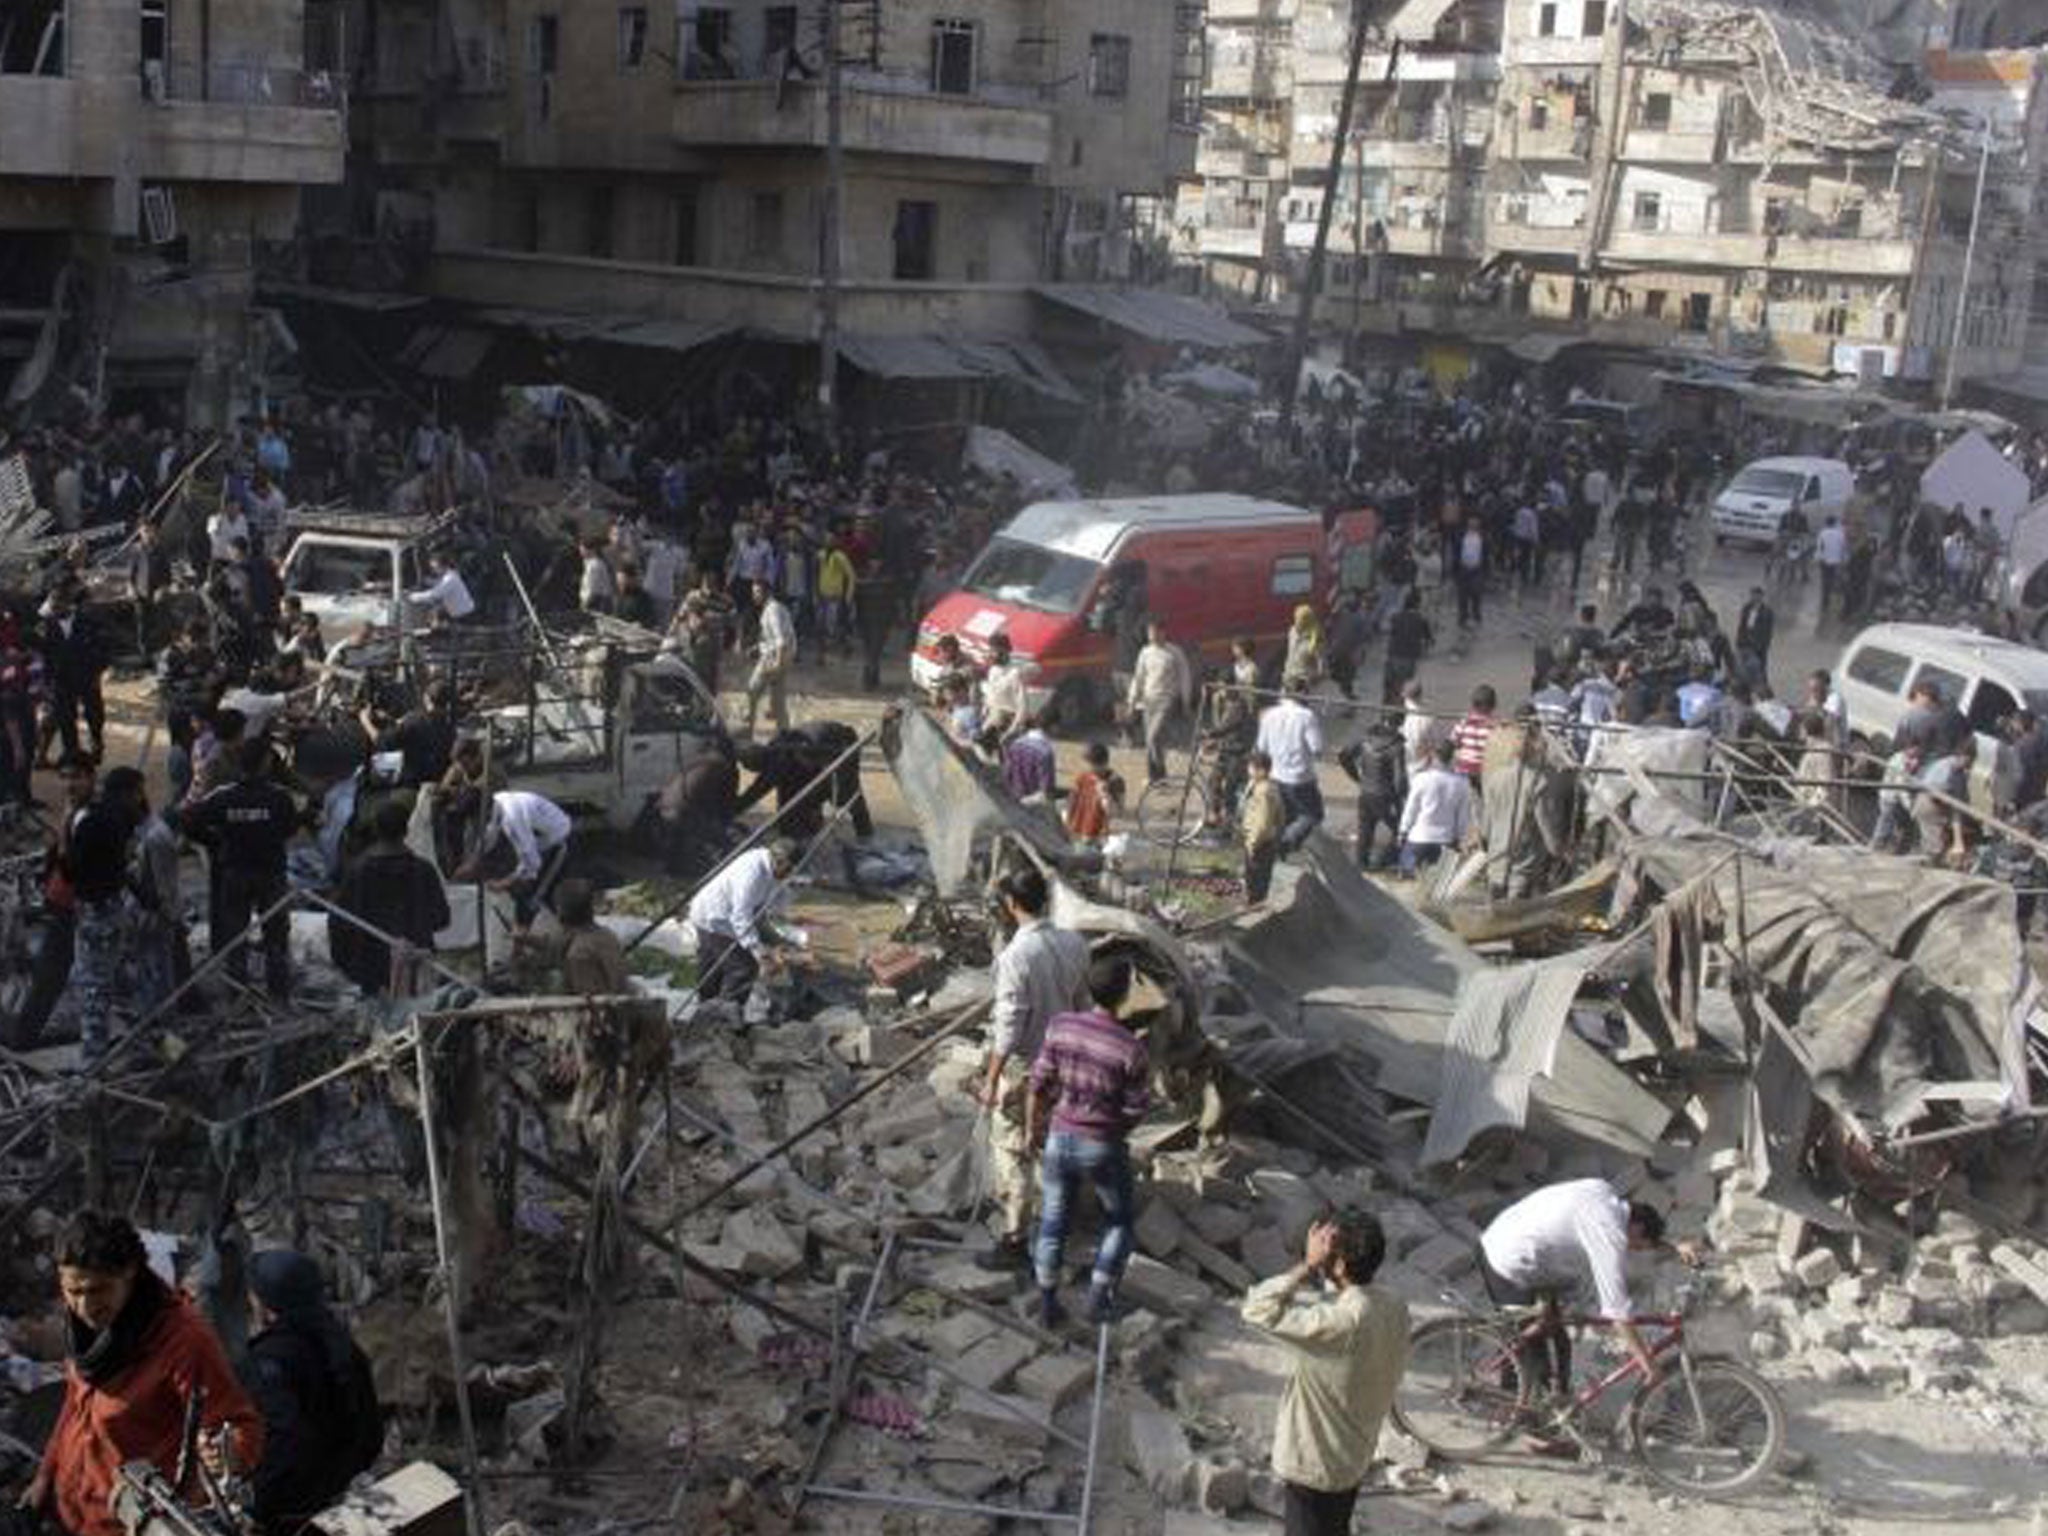 People search for survivors amid the rubble of collapsed buildings and tents after what activists said was shelling by forces loyal to Syria's President Bashar al-Assad on a market in Aleppo's Ahalouanah neighbourhood on 23 November.